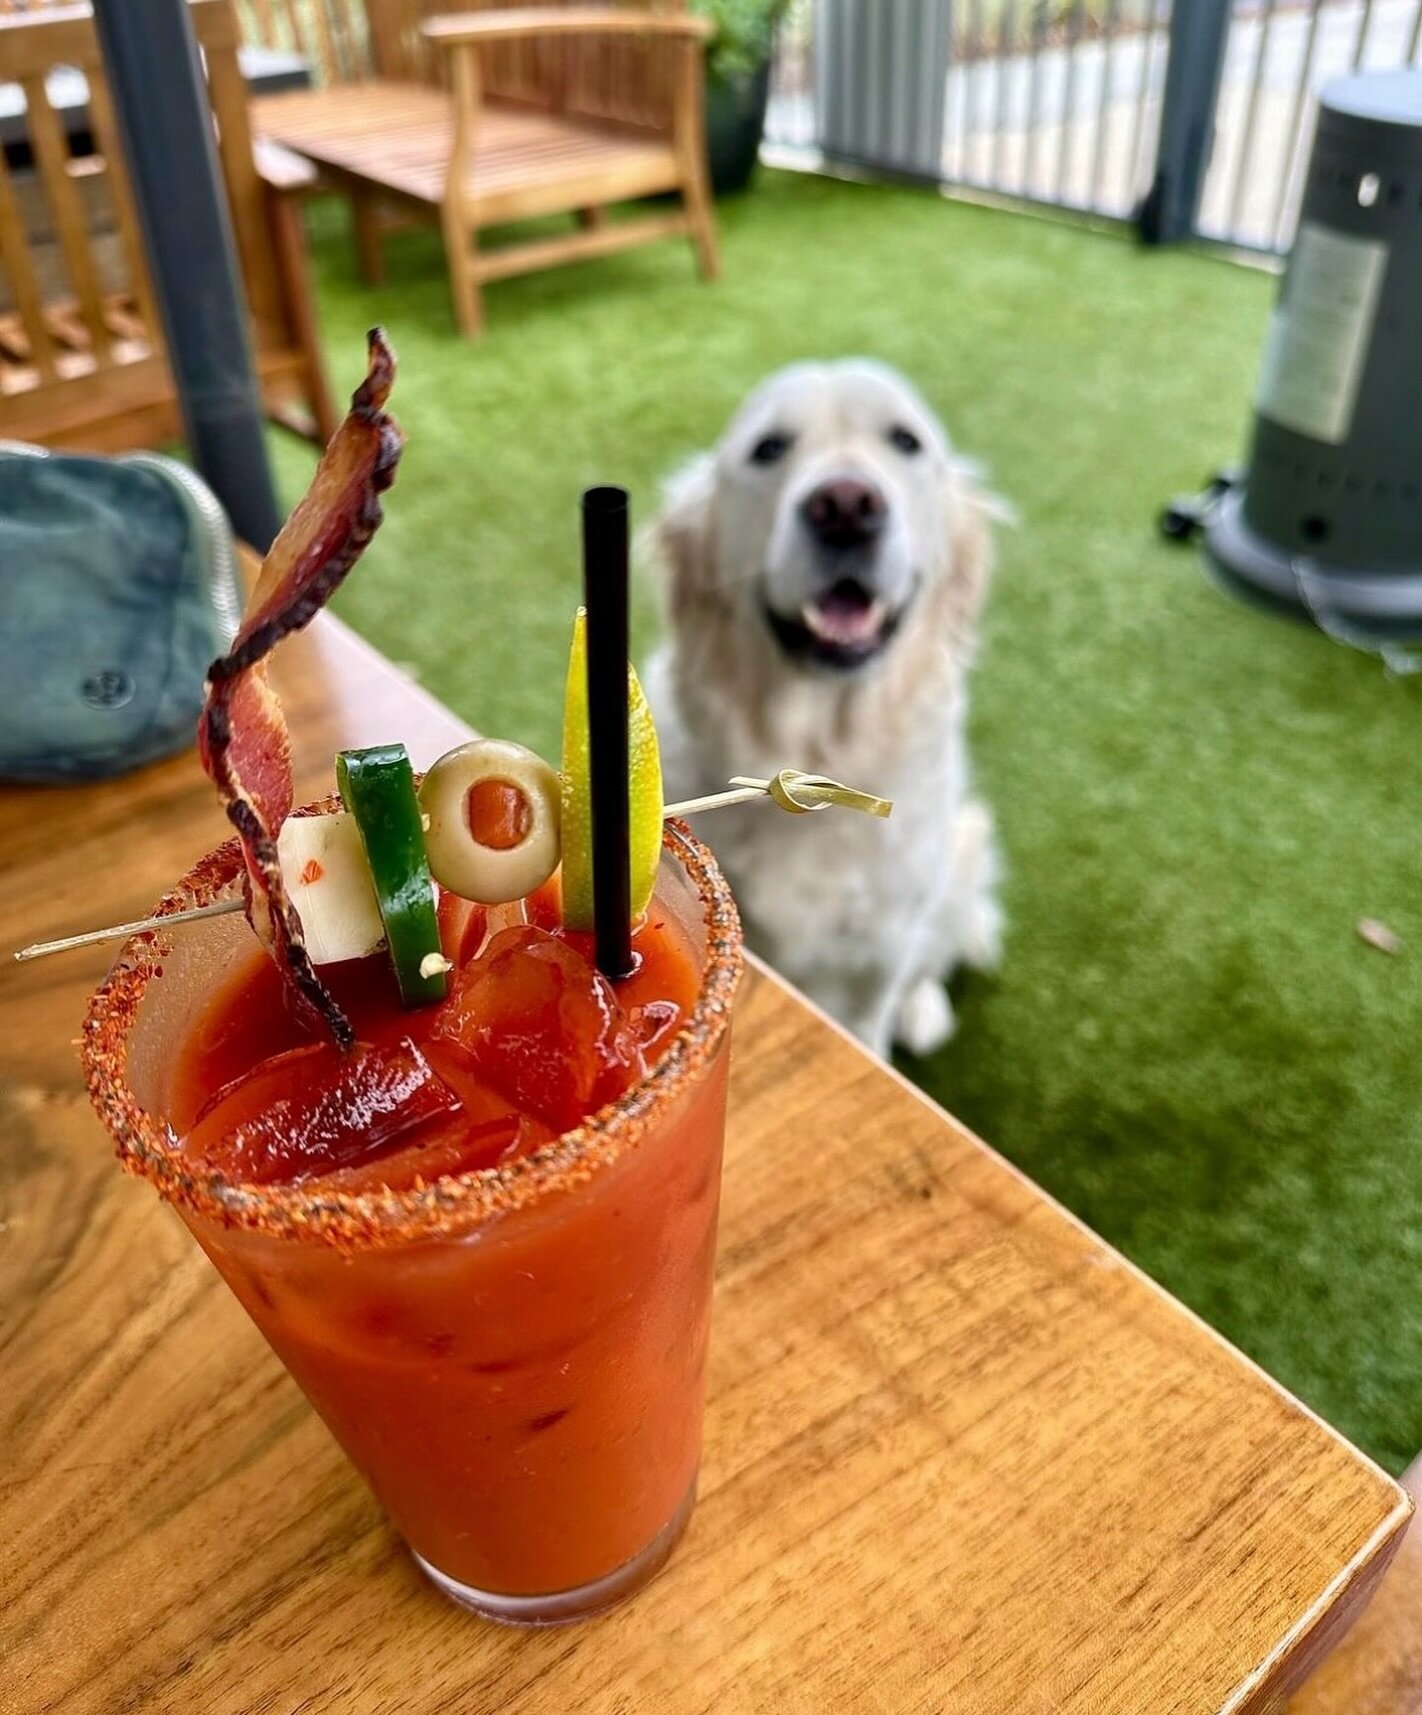 Our favorite BRUNCH view 😍 Bloody Marys are waiting for you&mdash; come on over! 📸: @klm636 @andersonscrabshack